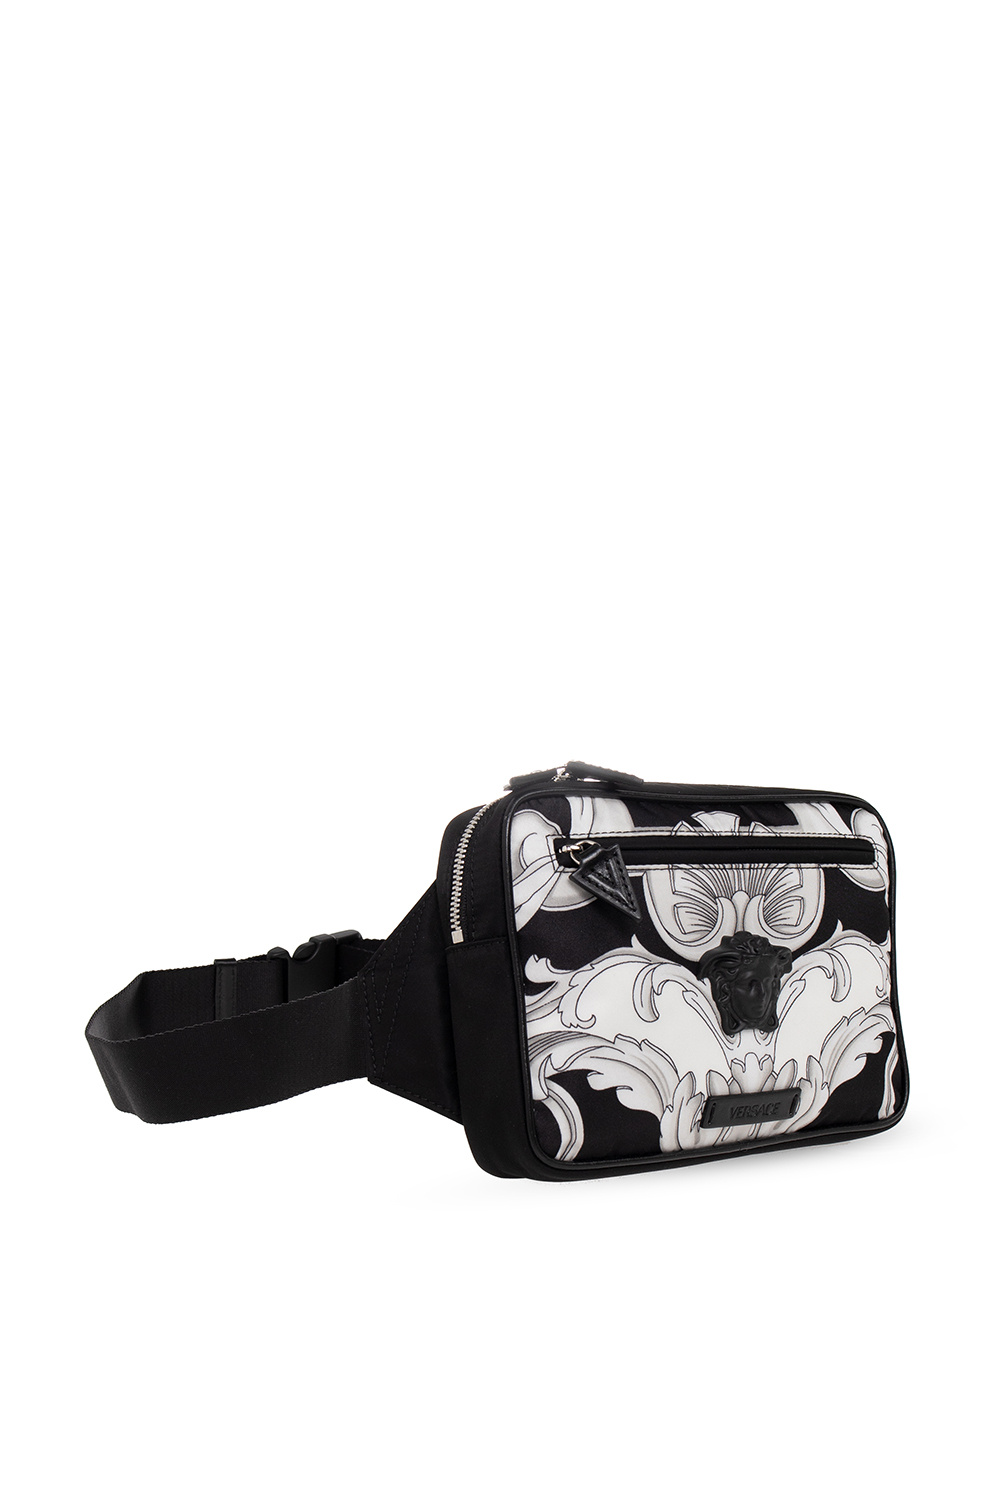 Versace Belt Limited bag with ‘Baroque’ pattern